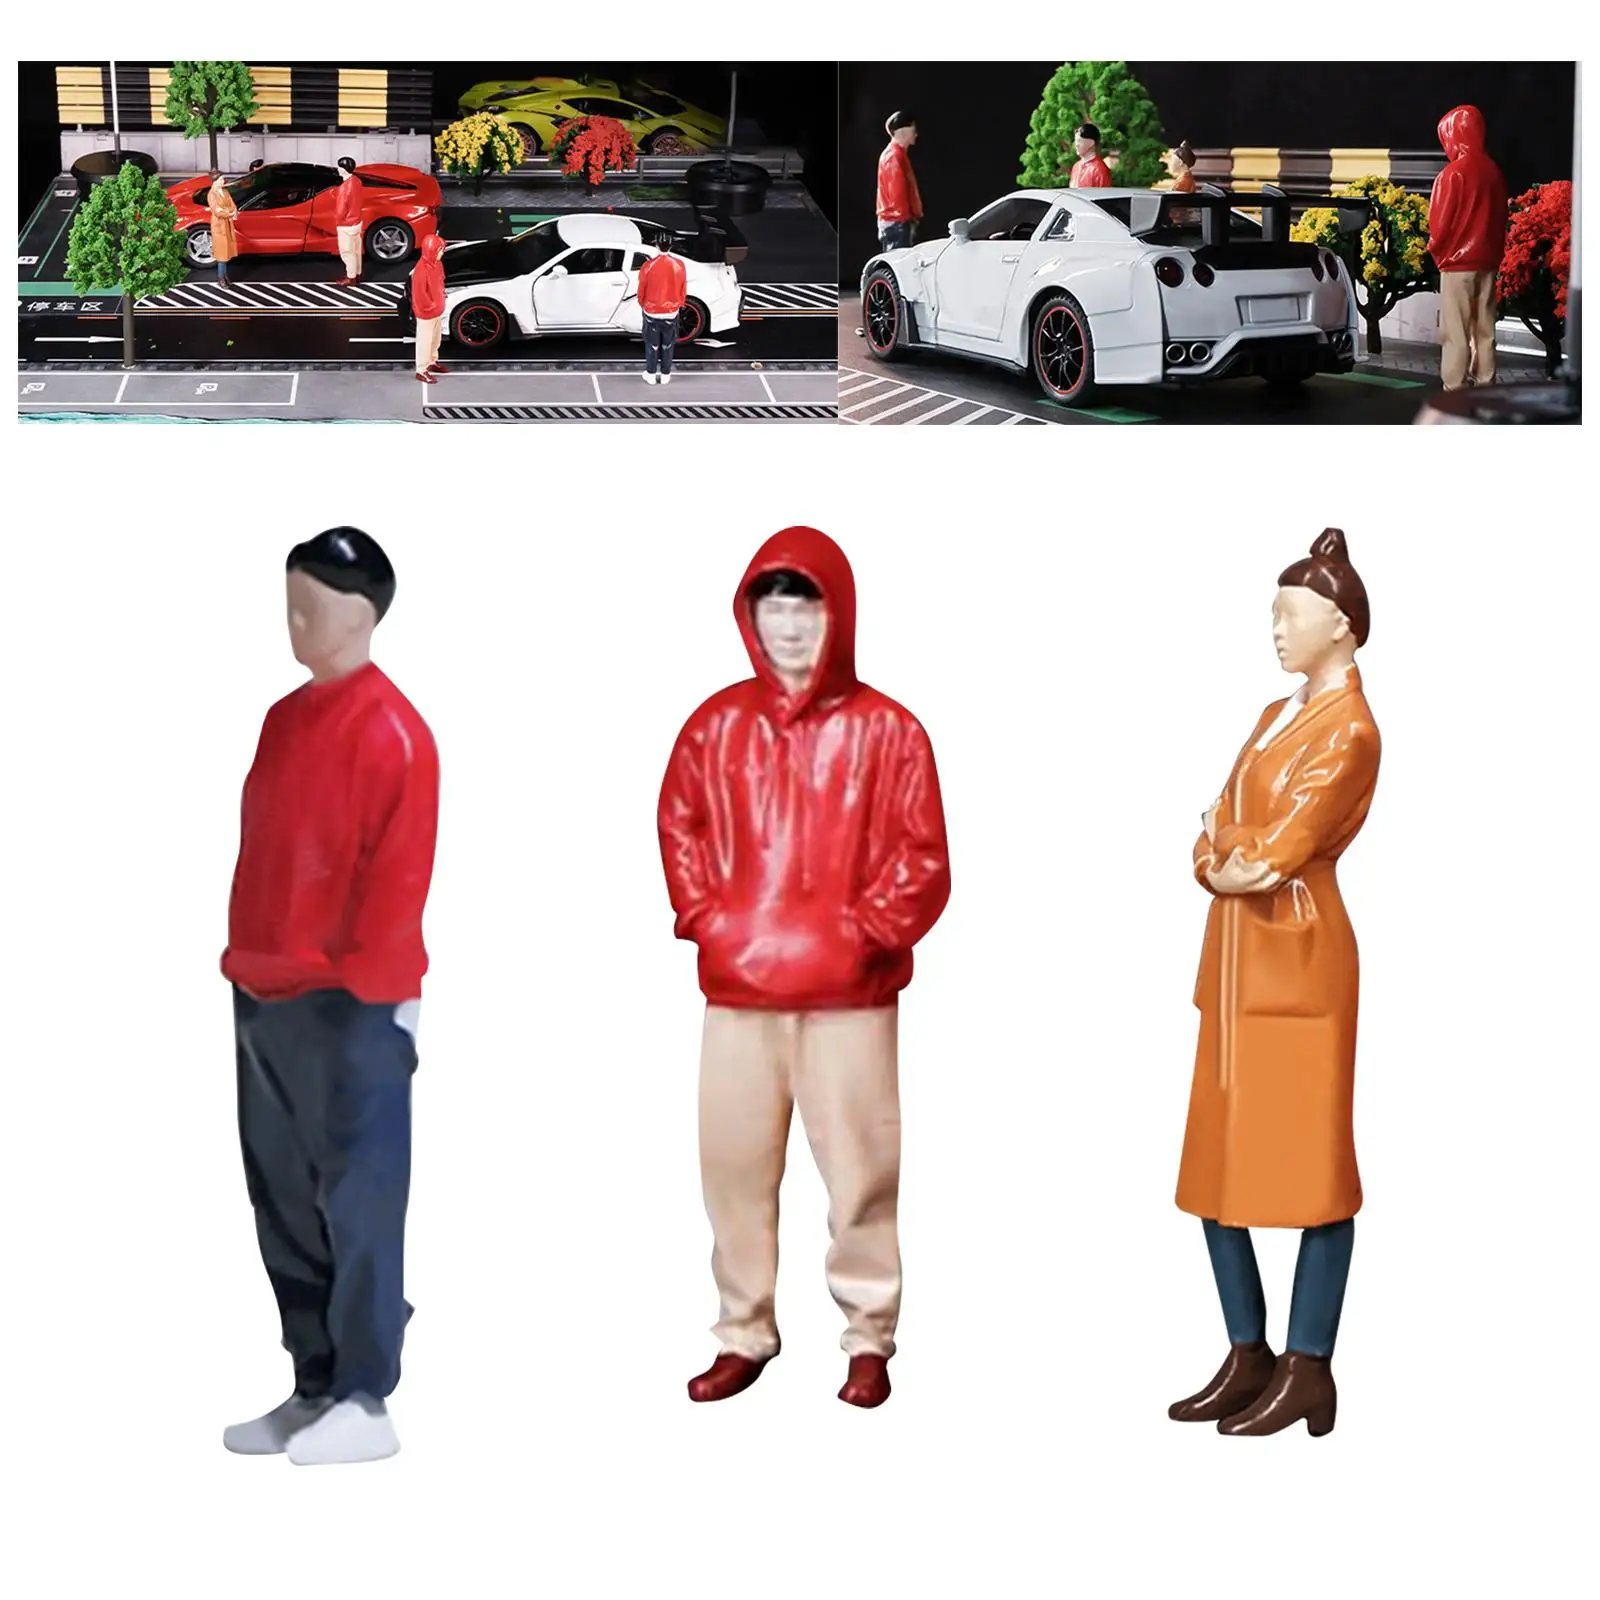 Realistic 1/64 Scale People Figurines for Miniature Scene Layout Decoration